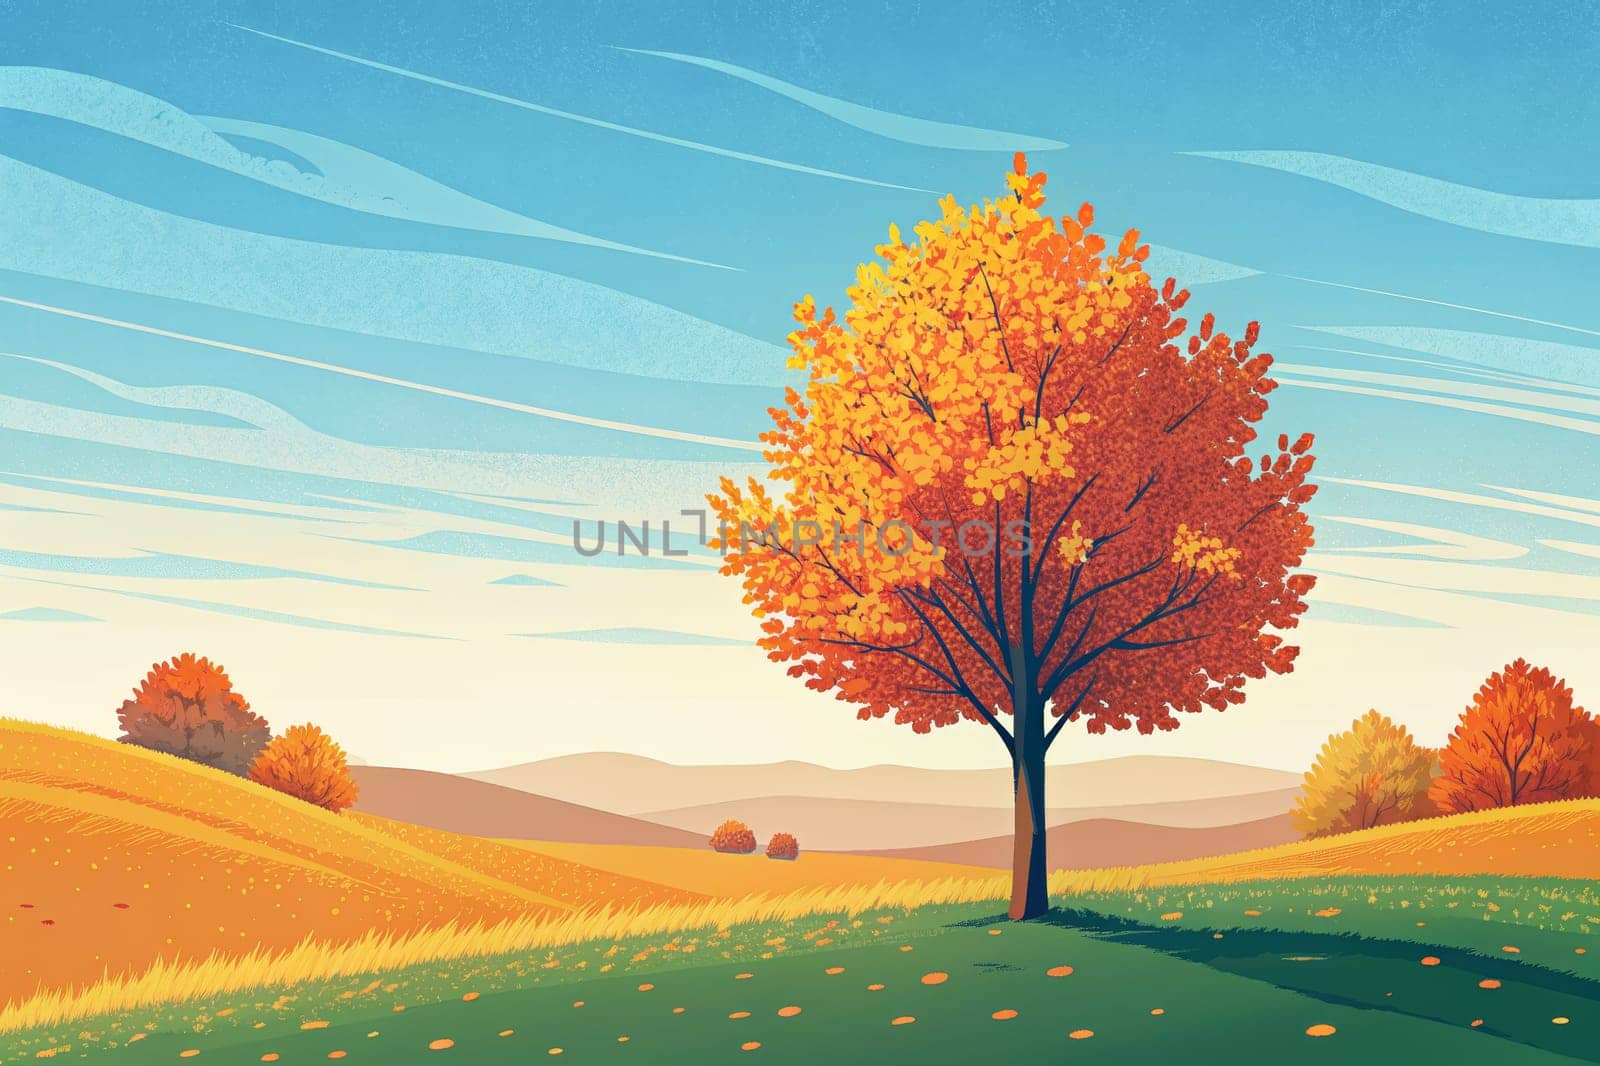 A lone deciduous tree with vibrant orange and red leaves stands proudly against a backdrop of rolling hills and a clear blue sky. Scattered fallen leaves paint the green grass beneath the tree. The distant hills are bathed in a soft golden light.